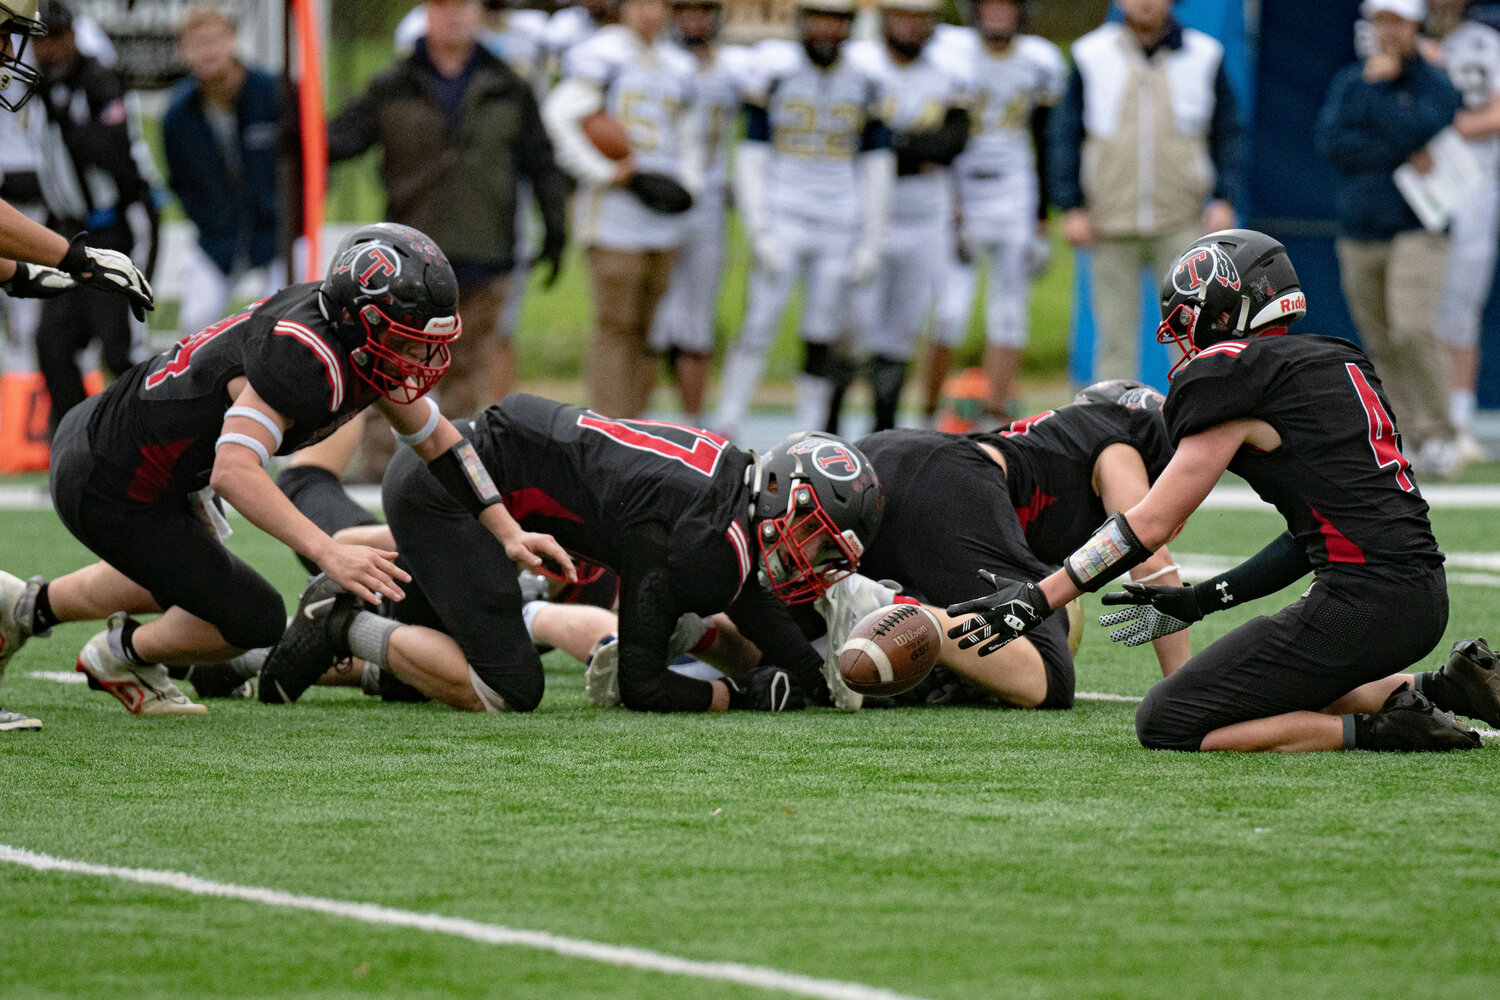 The Toledo defense recovers a fumble  during a 21-12 win over Tri Cities Prep Nov. 11.